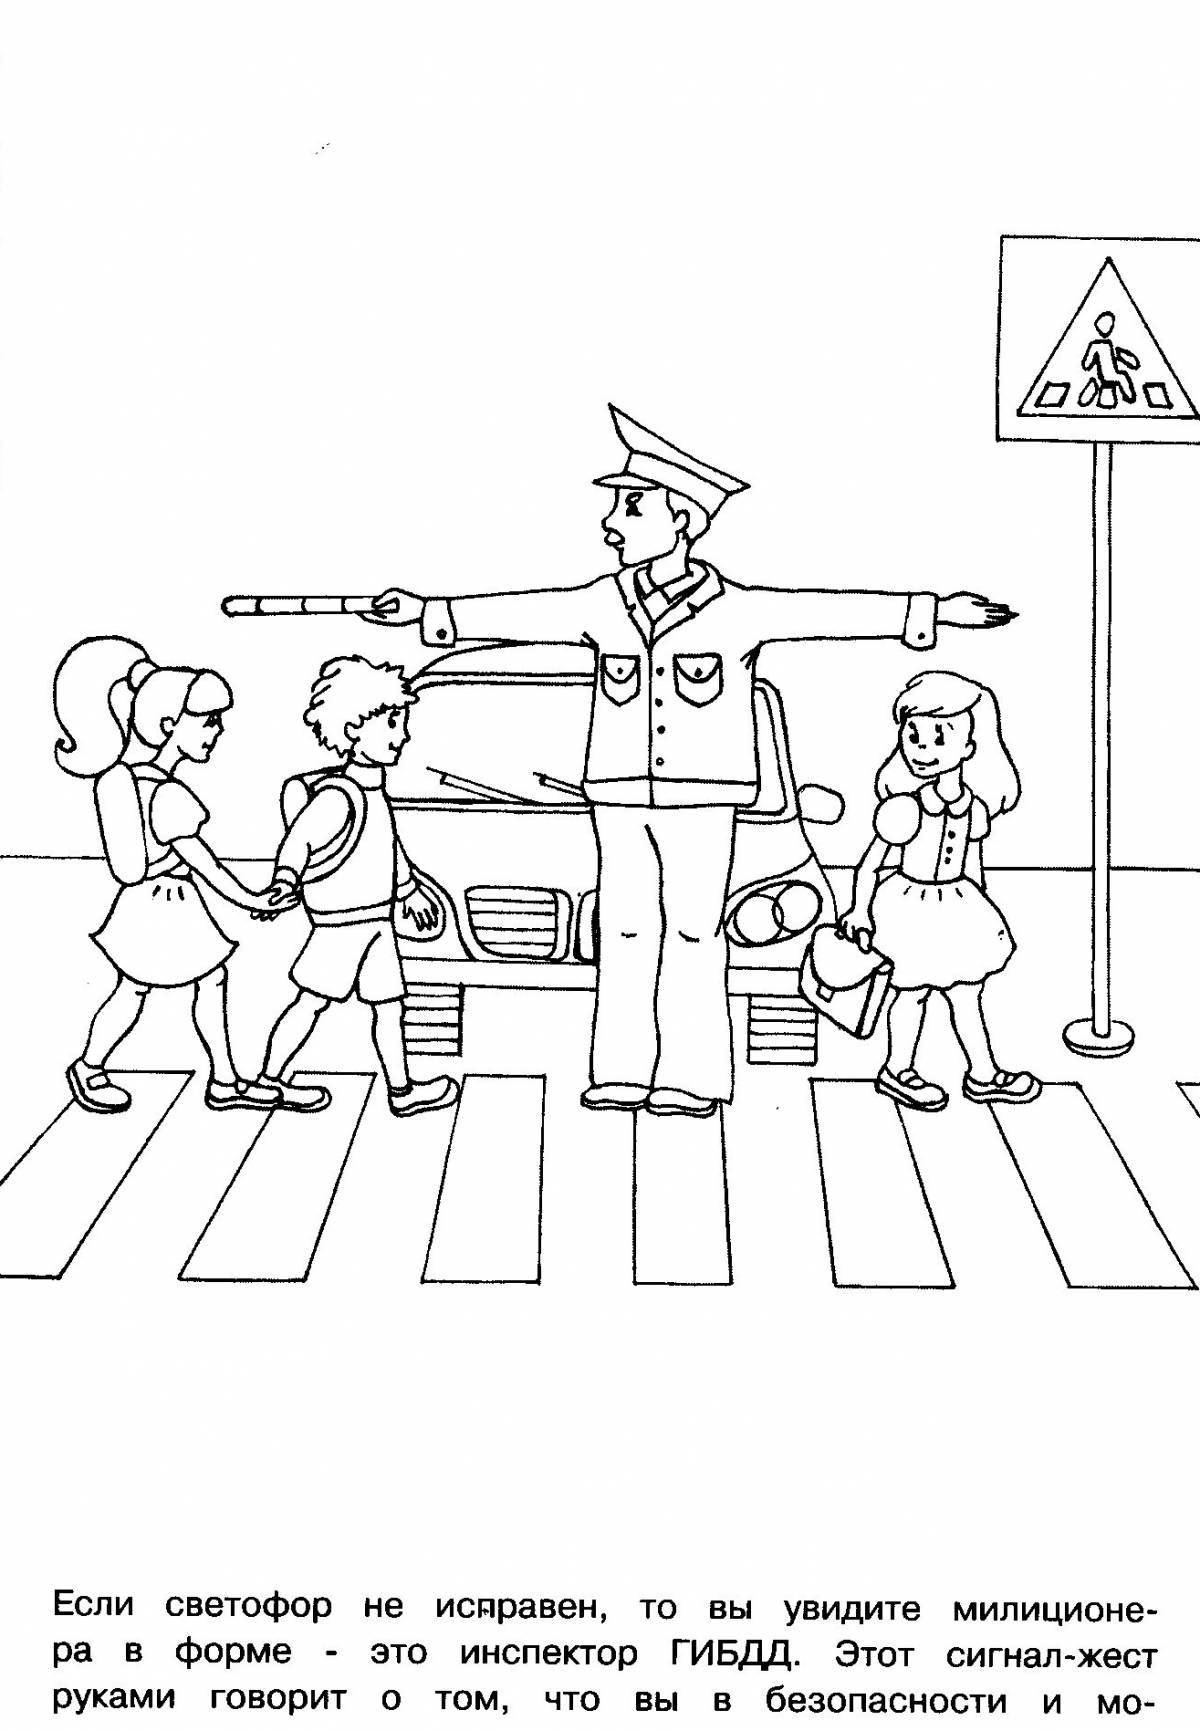 Fun coloring traffic controller for kids